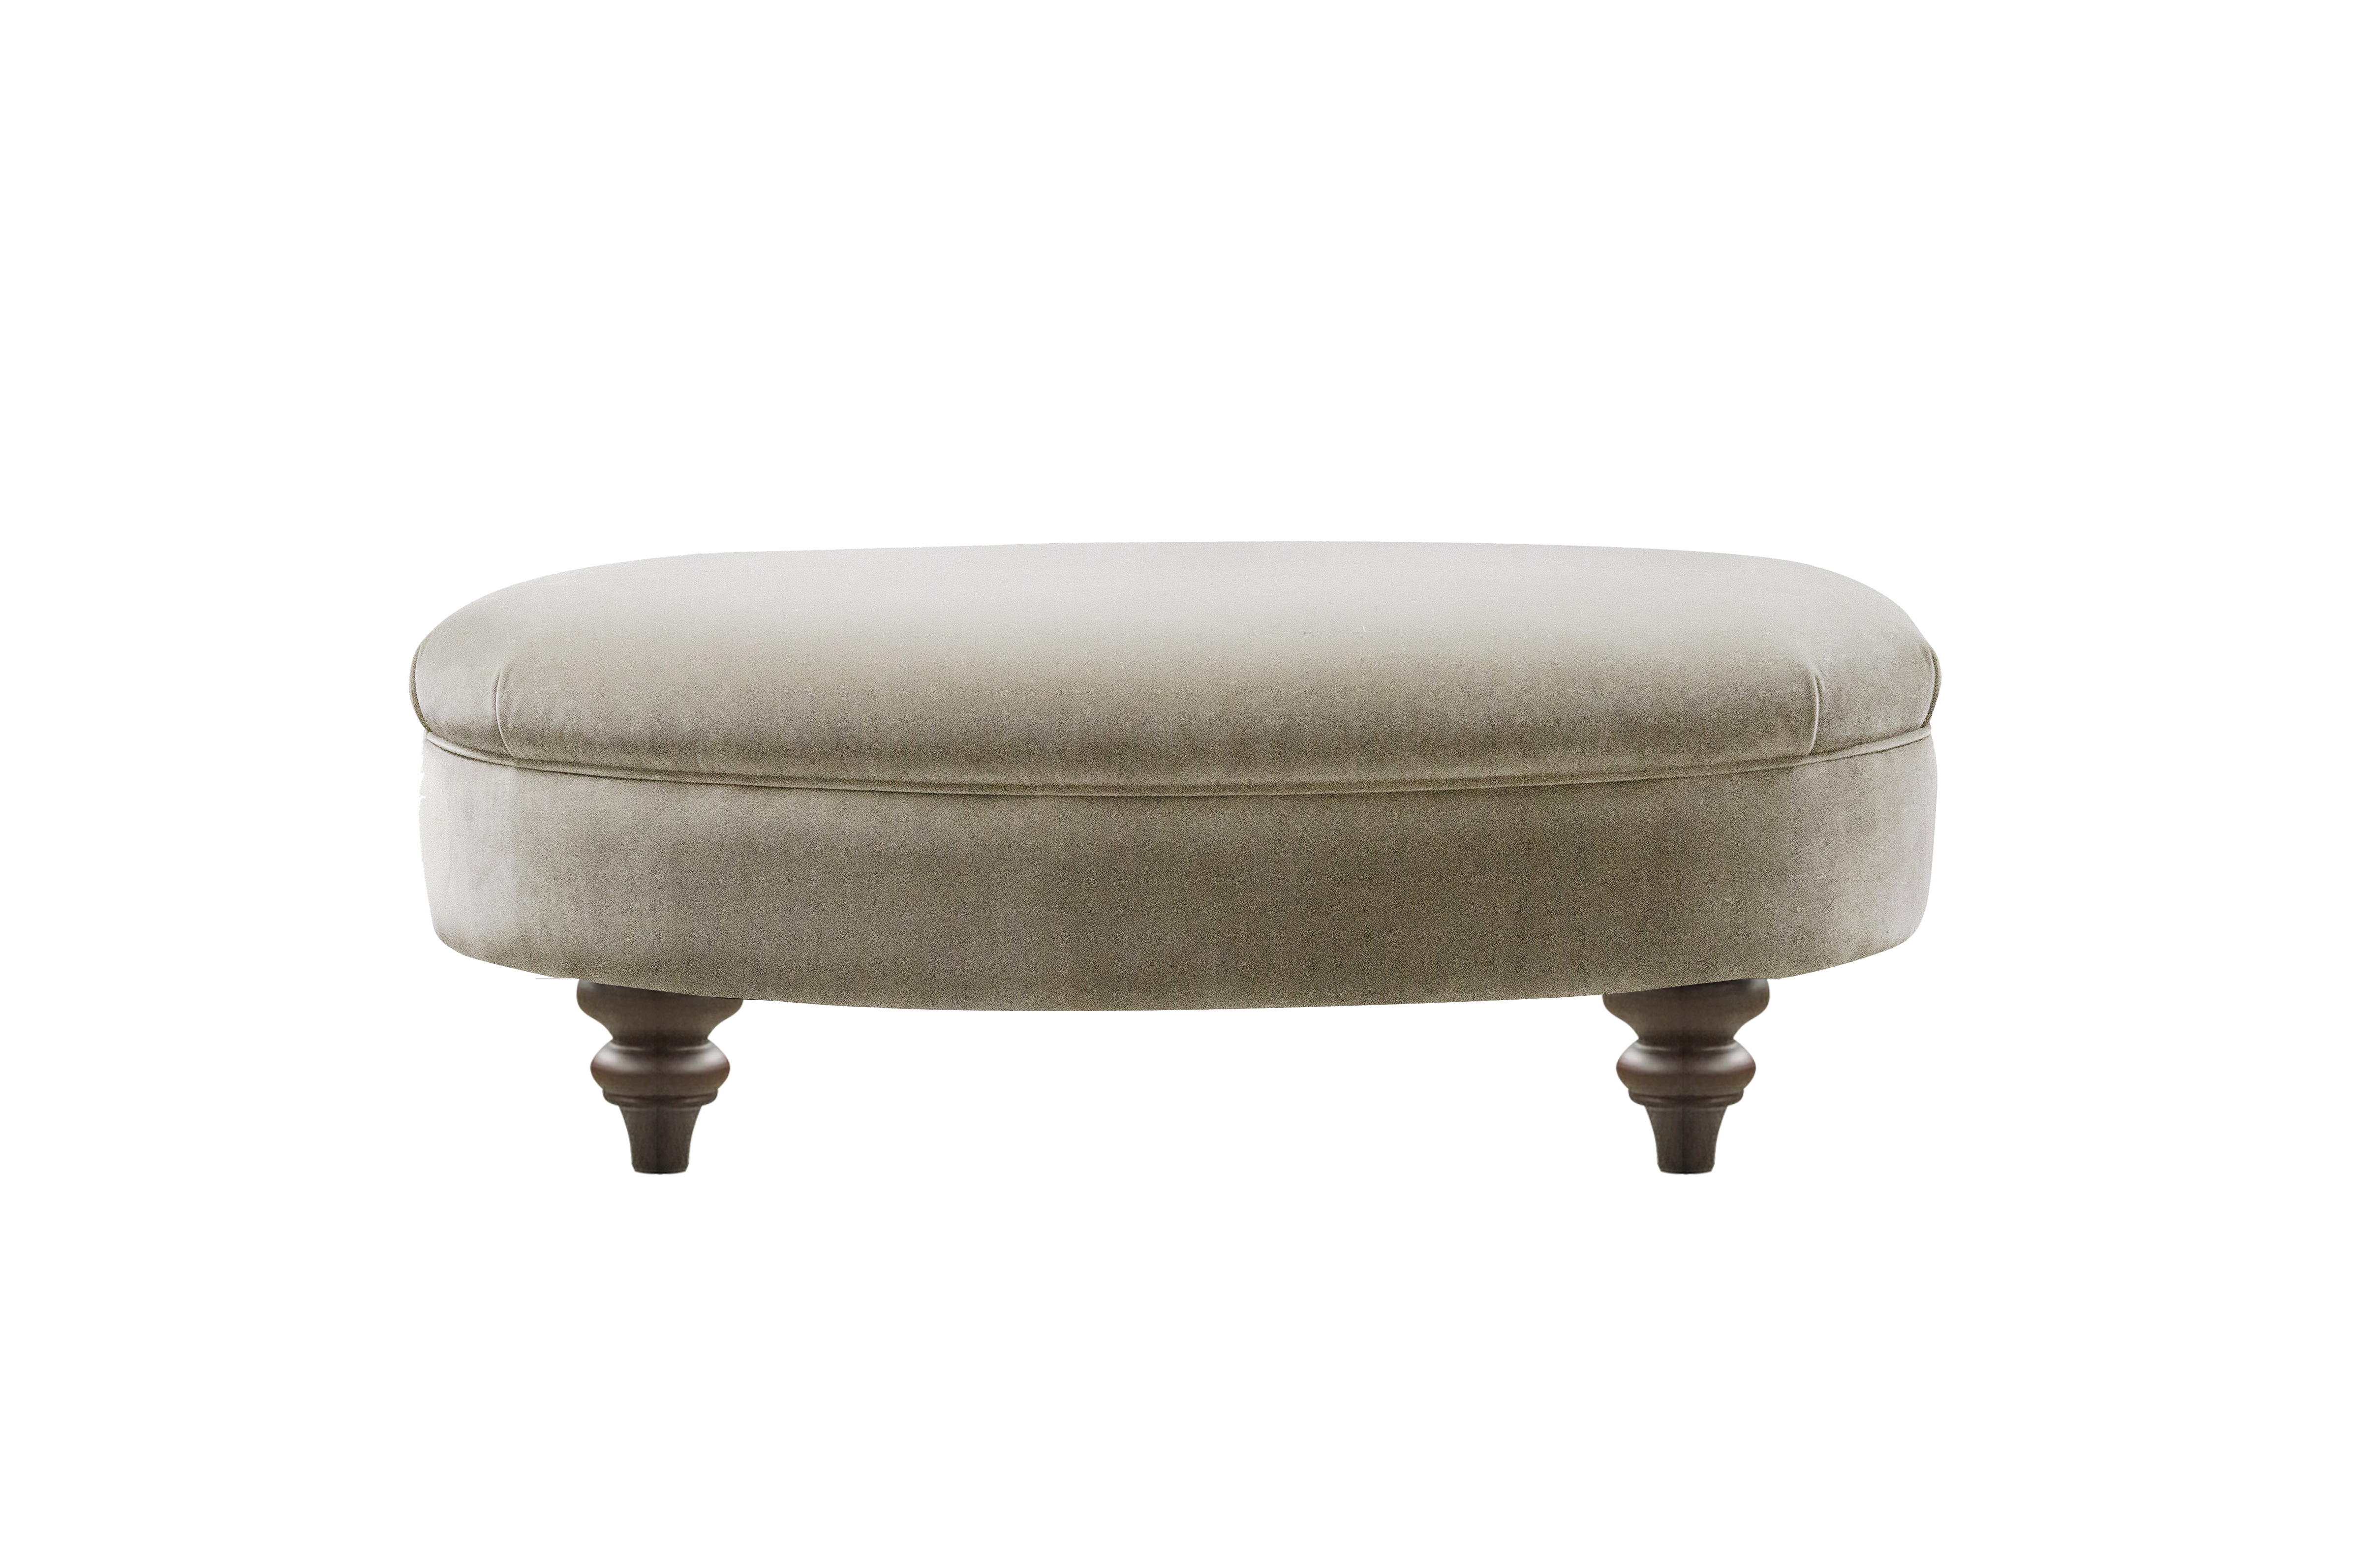 Houghton Oval Footstool